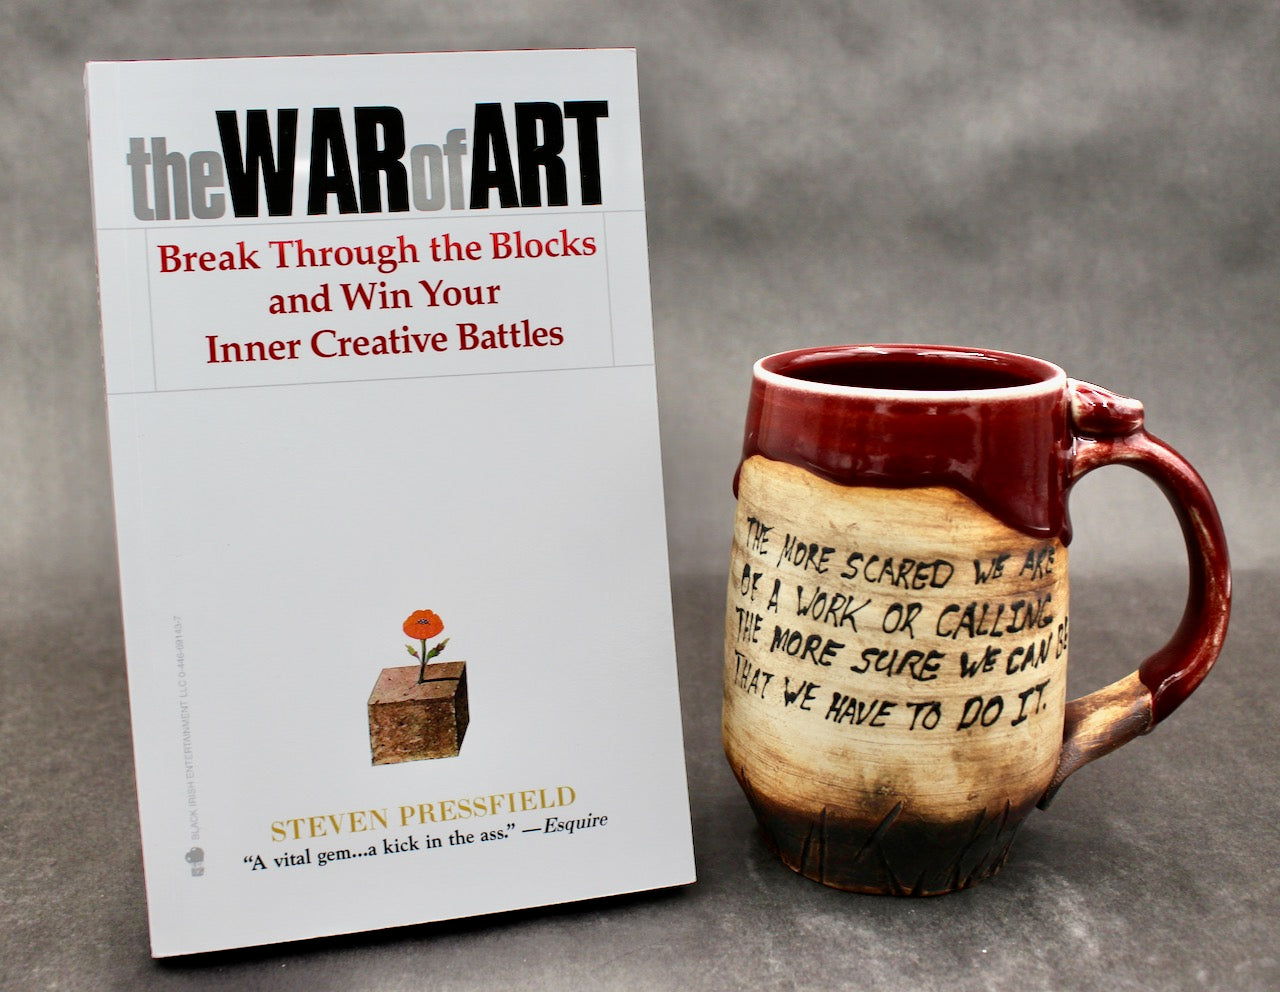 One Bullet Flower Mug and Autographed Book, "The War of Art" by Steven Pressfield (SK7800)